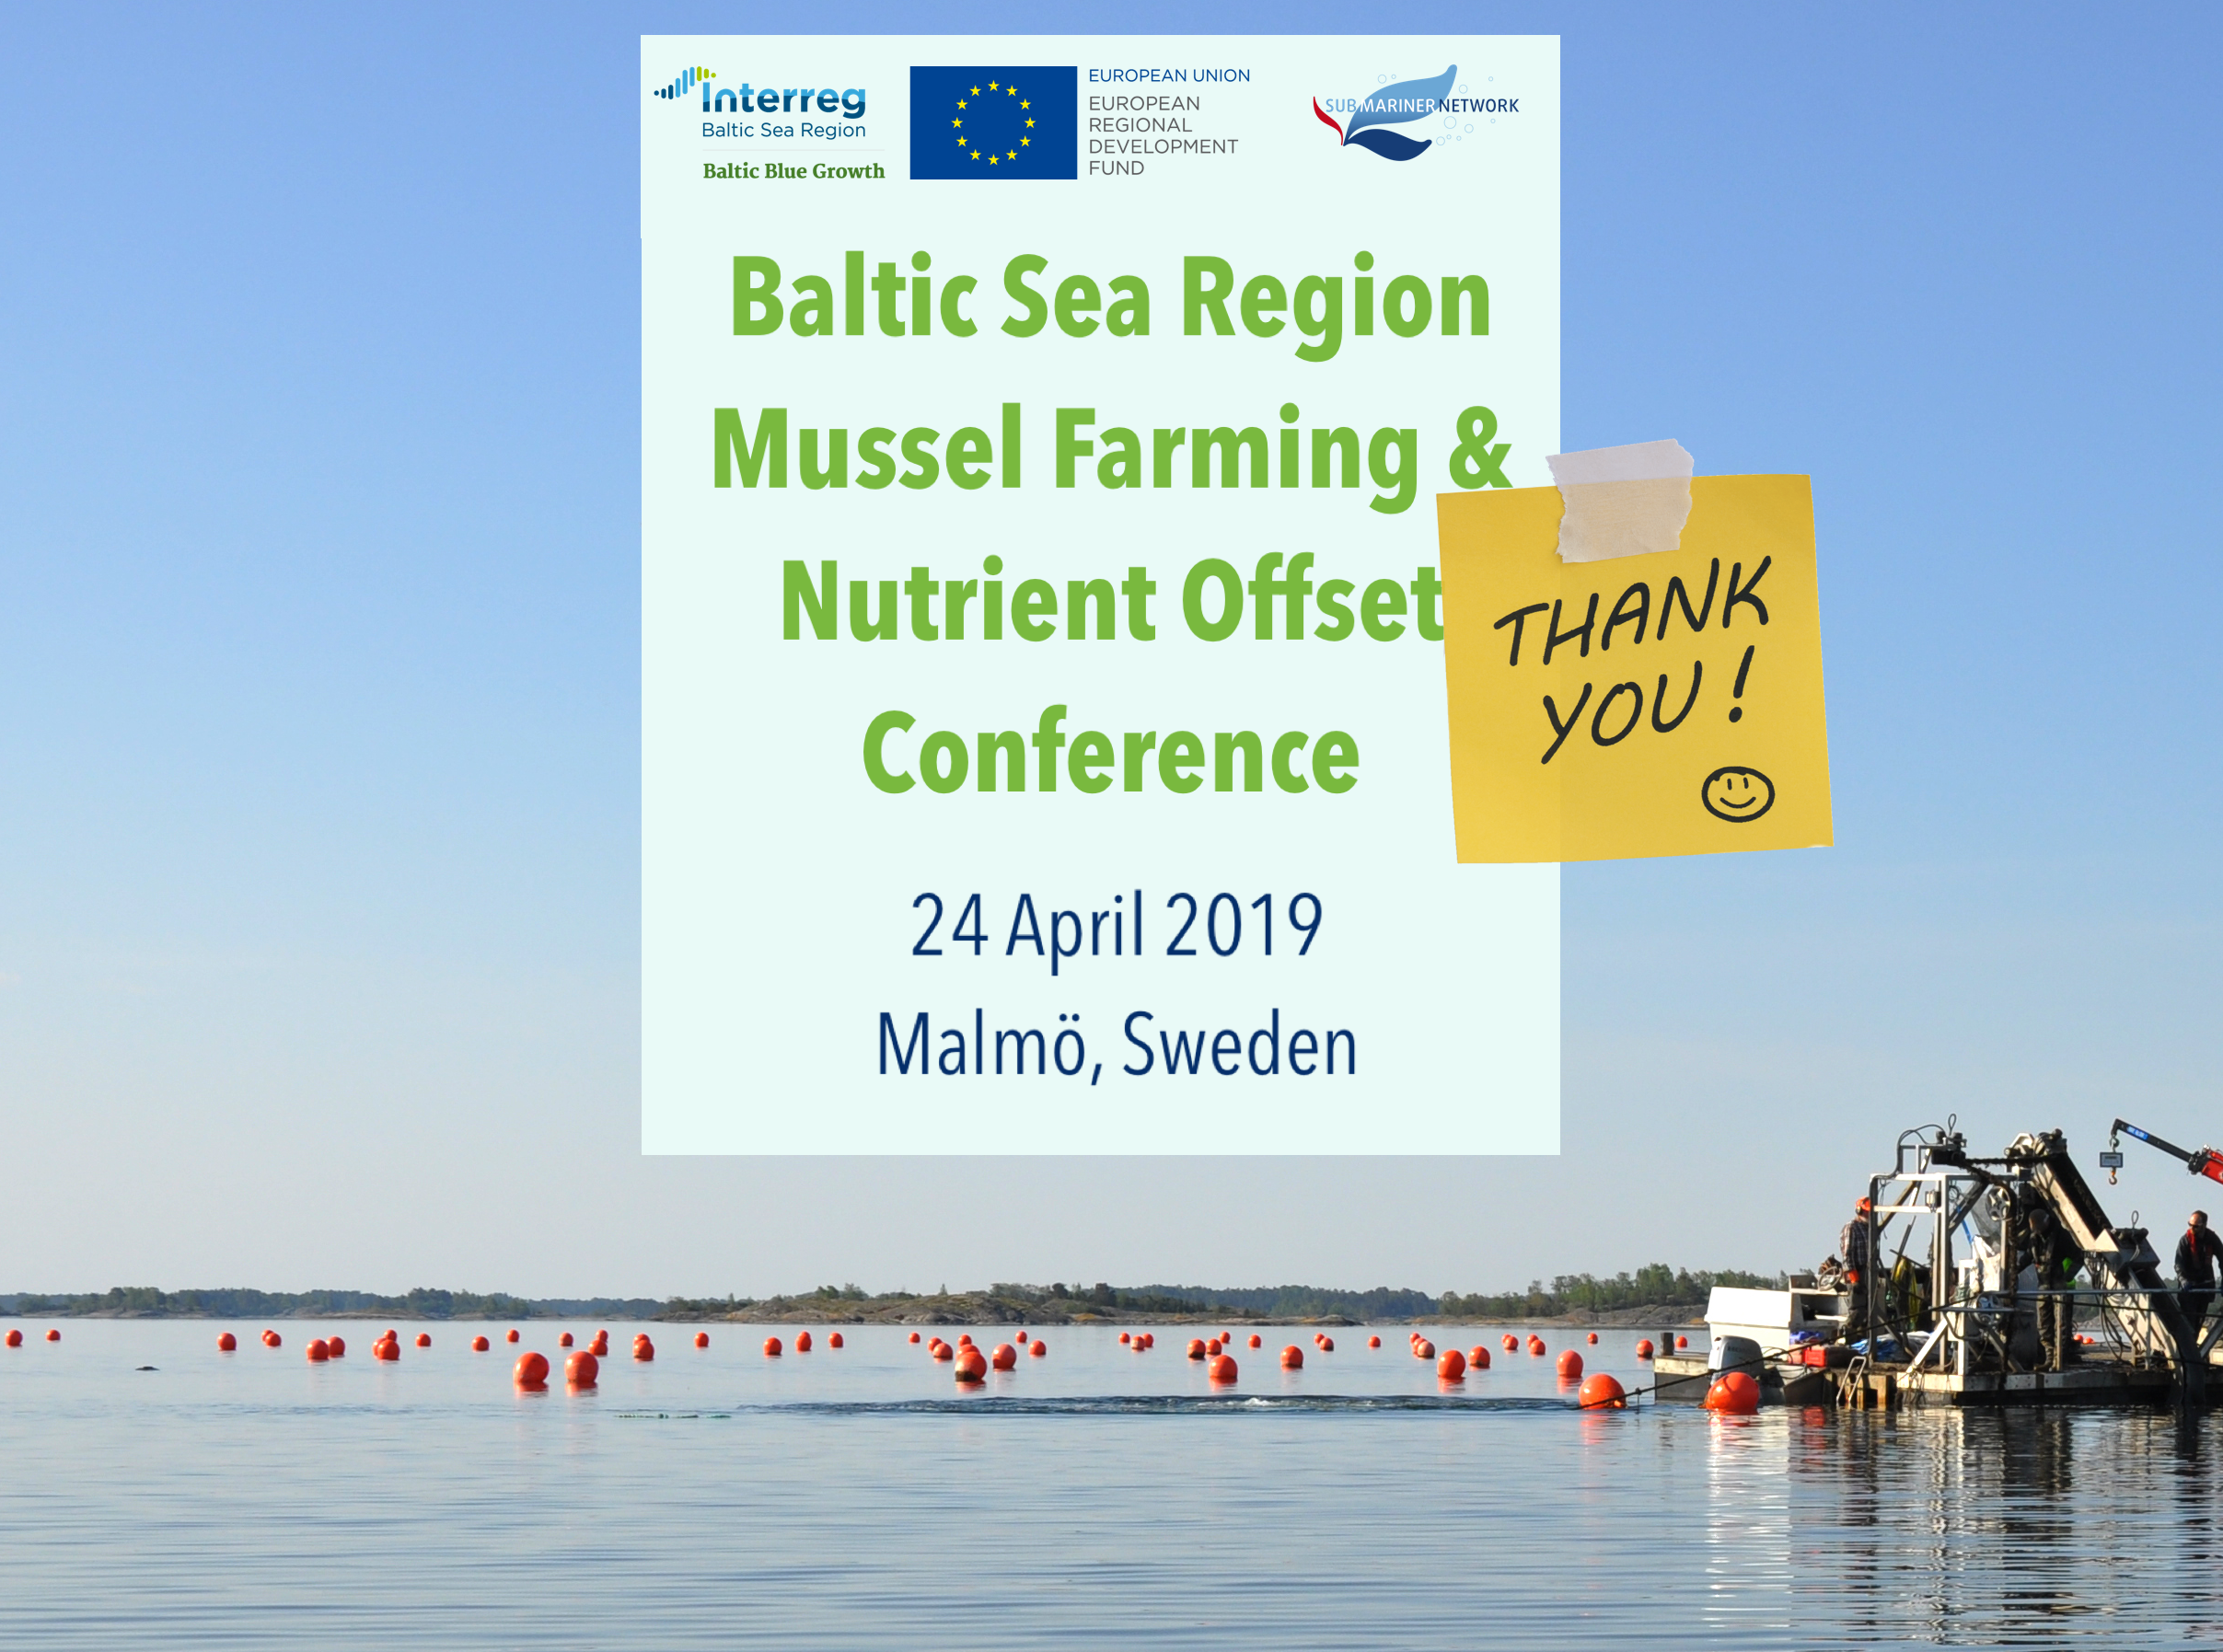 REGISTER for the Baltic Sea Mussel Farming & Nutrient Offset Conference